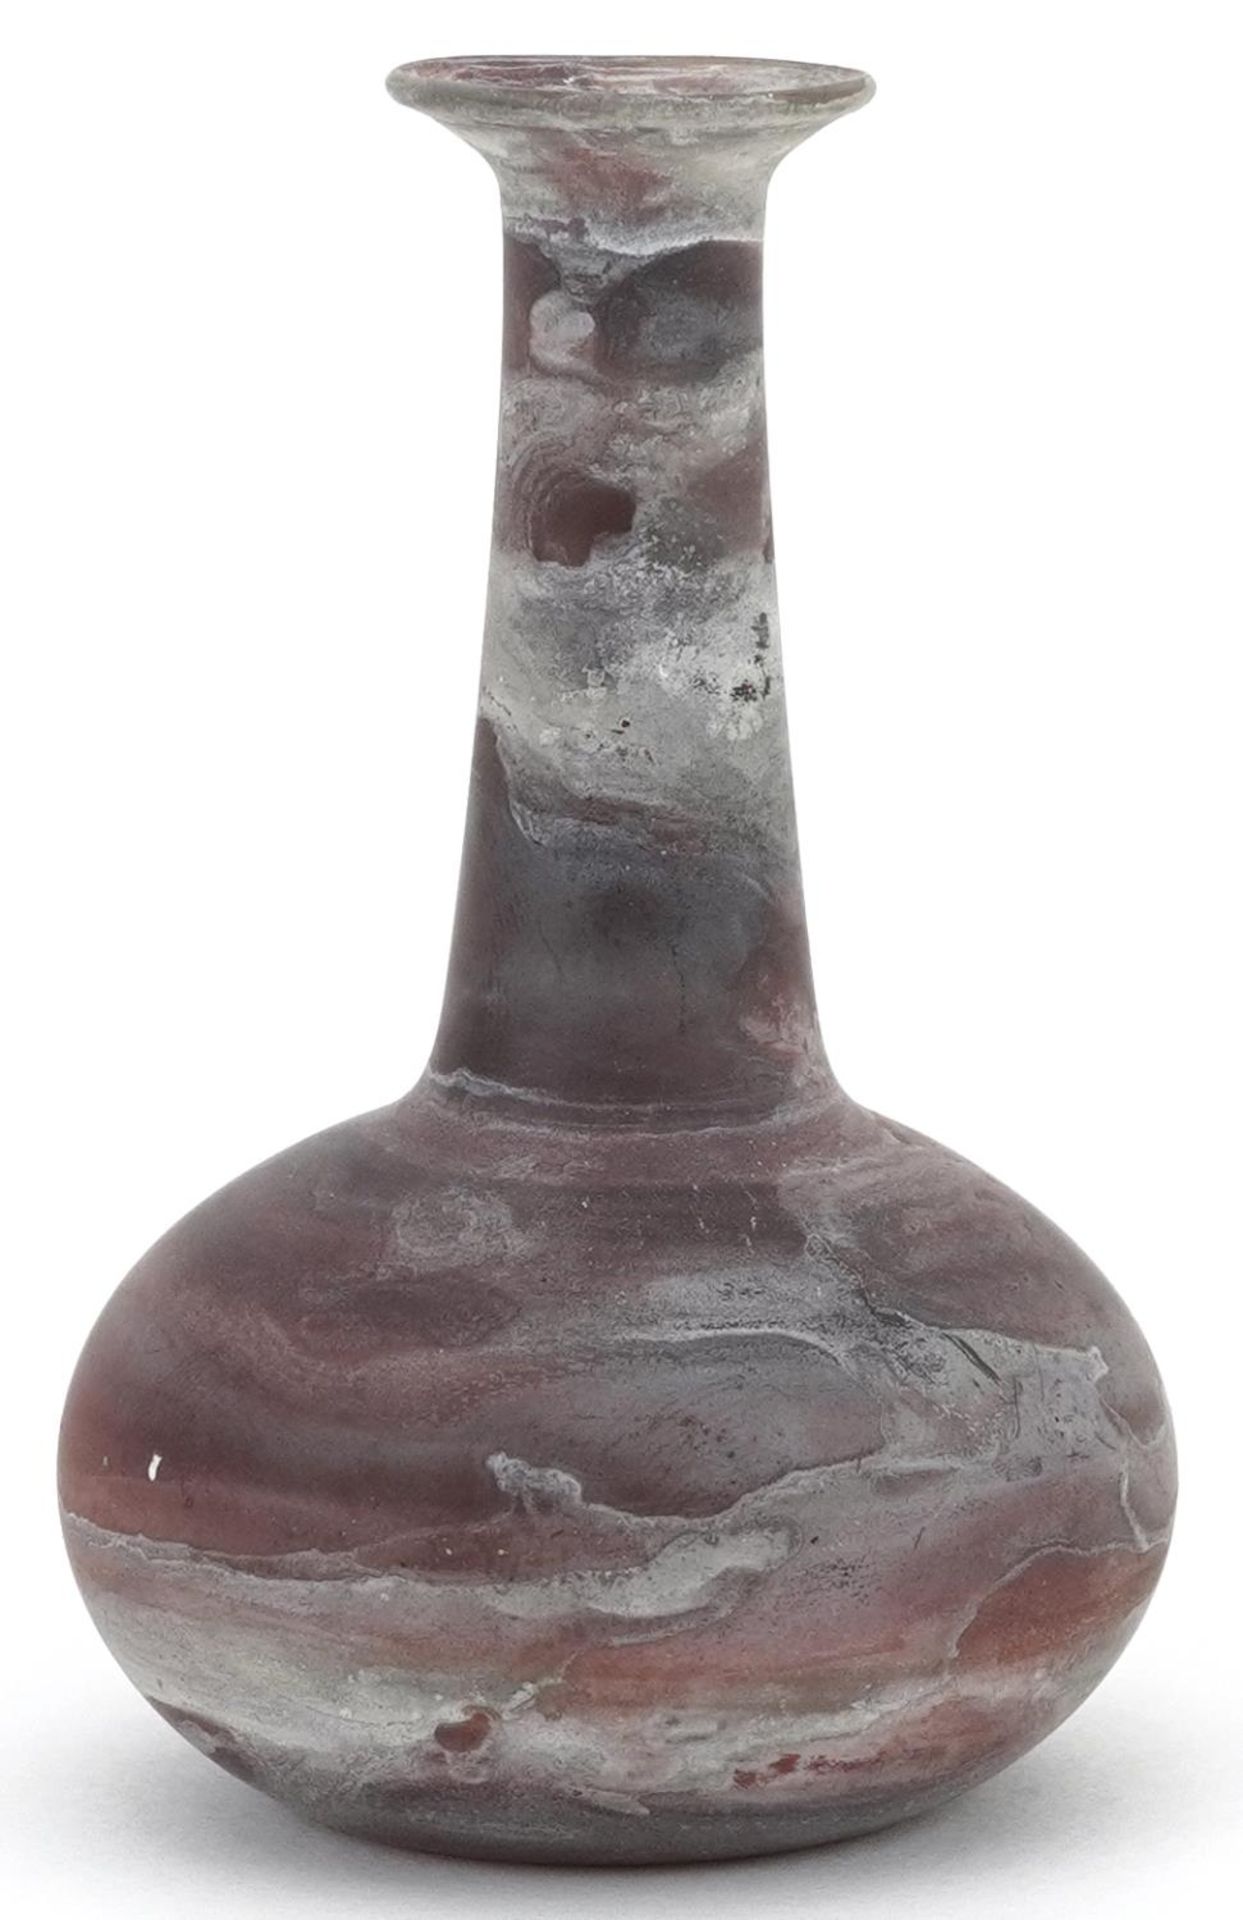 Antique marbleised glass vase, probably Roman, Old Collection inscription to the base, 7.5cm high